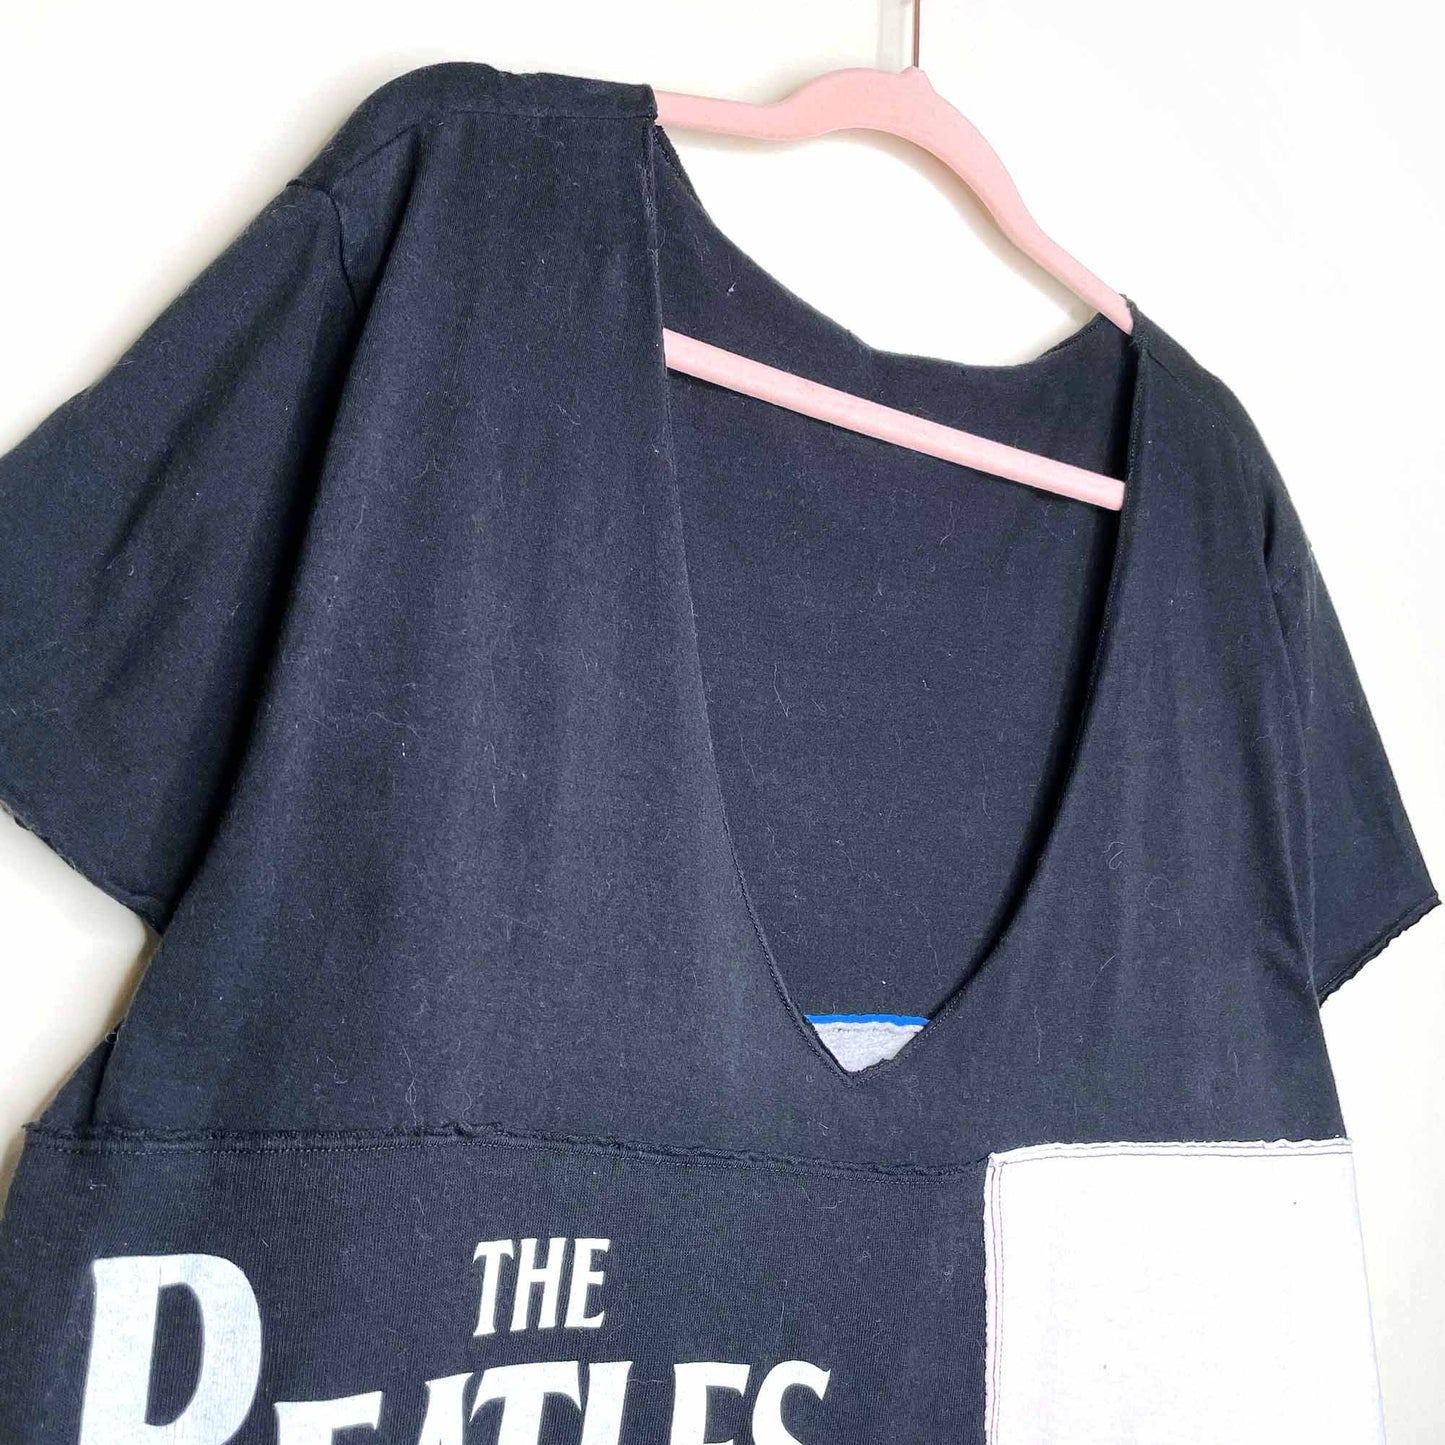 the beatles deconstructed v-neck tee - size xl